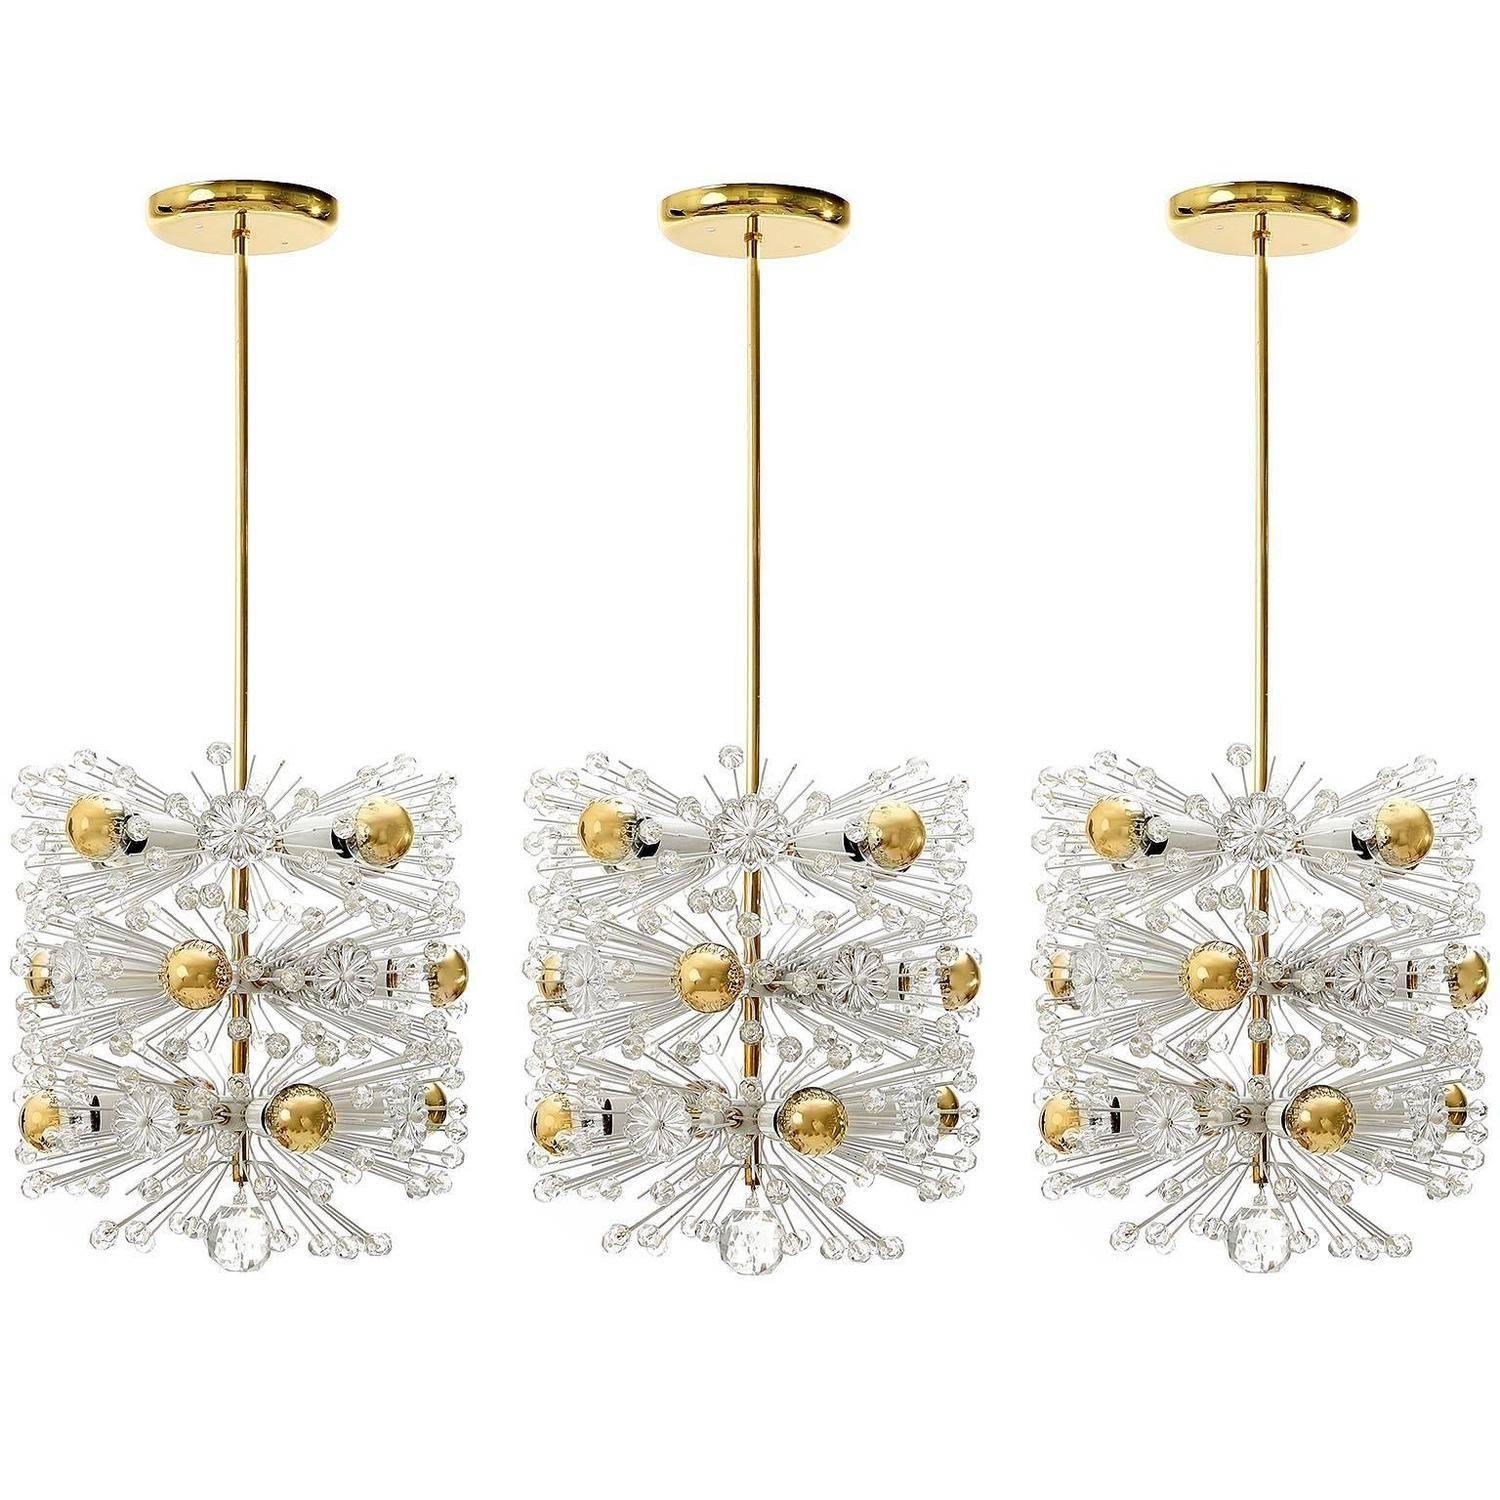 Mid-20th Century Pair of Brass Glass Sconces by Emil Stejnar for Rupert Nikoll, Vienna, 1950s For Sale